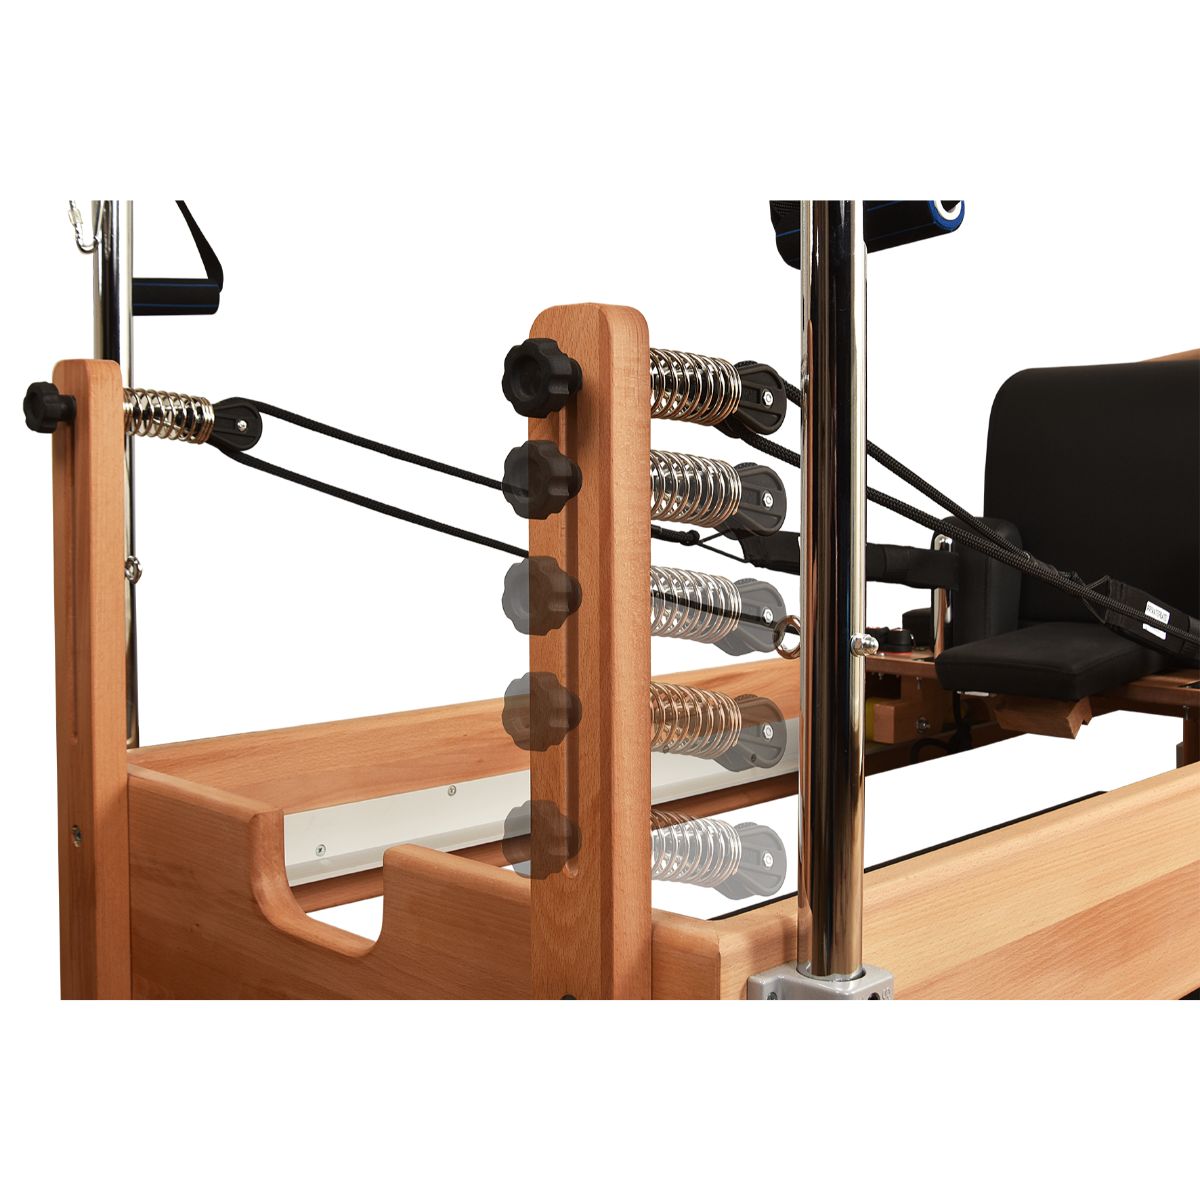 Gym Use Wooden Private Training Equipment Multi-Functional Wooden Pilates  Bed Pilates Reformer to Body Strength Exercise - China Foldable Pilates  Reformer and Pilates Reformer Used price